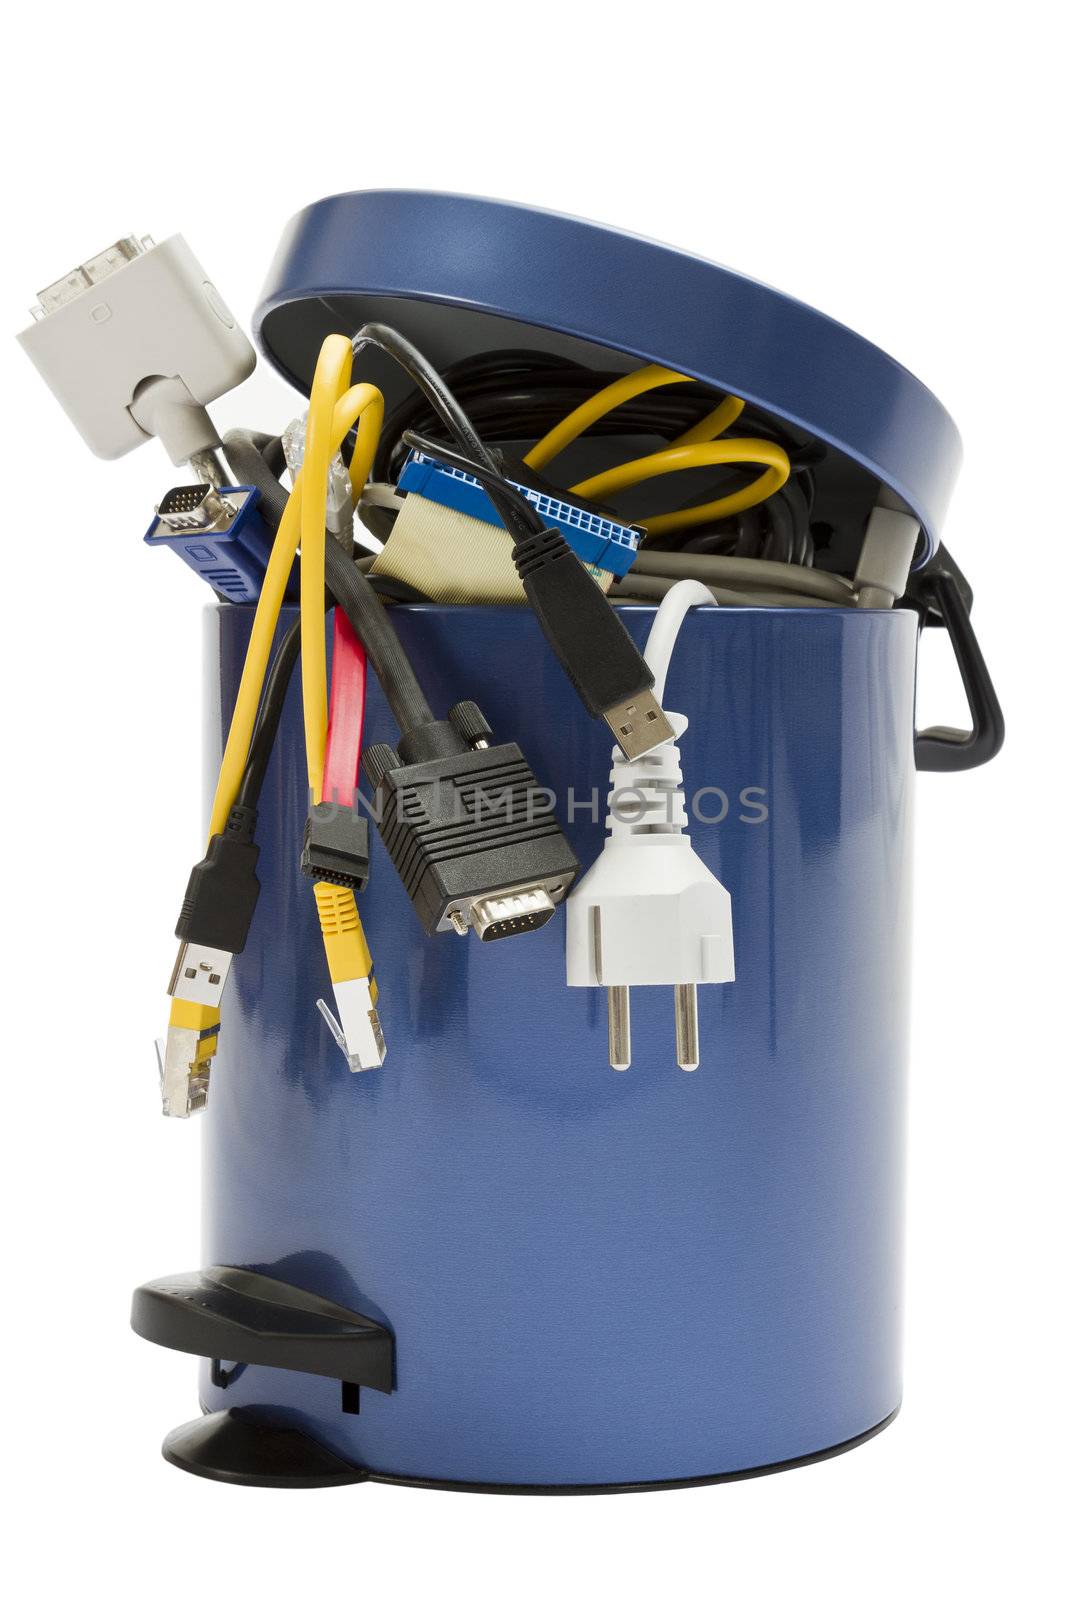 small trashcan with electronic waste on white background